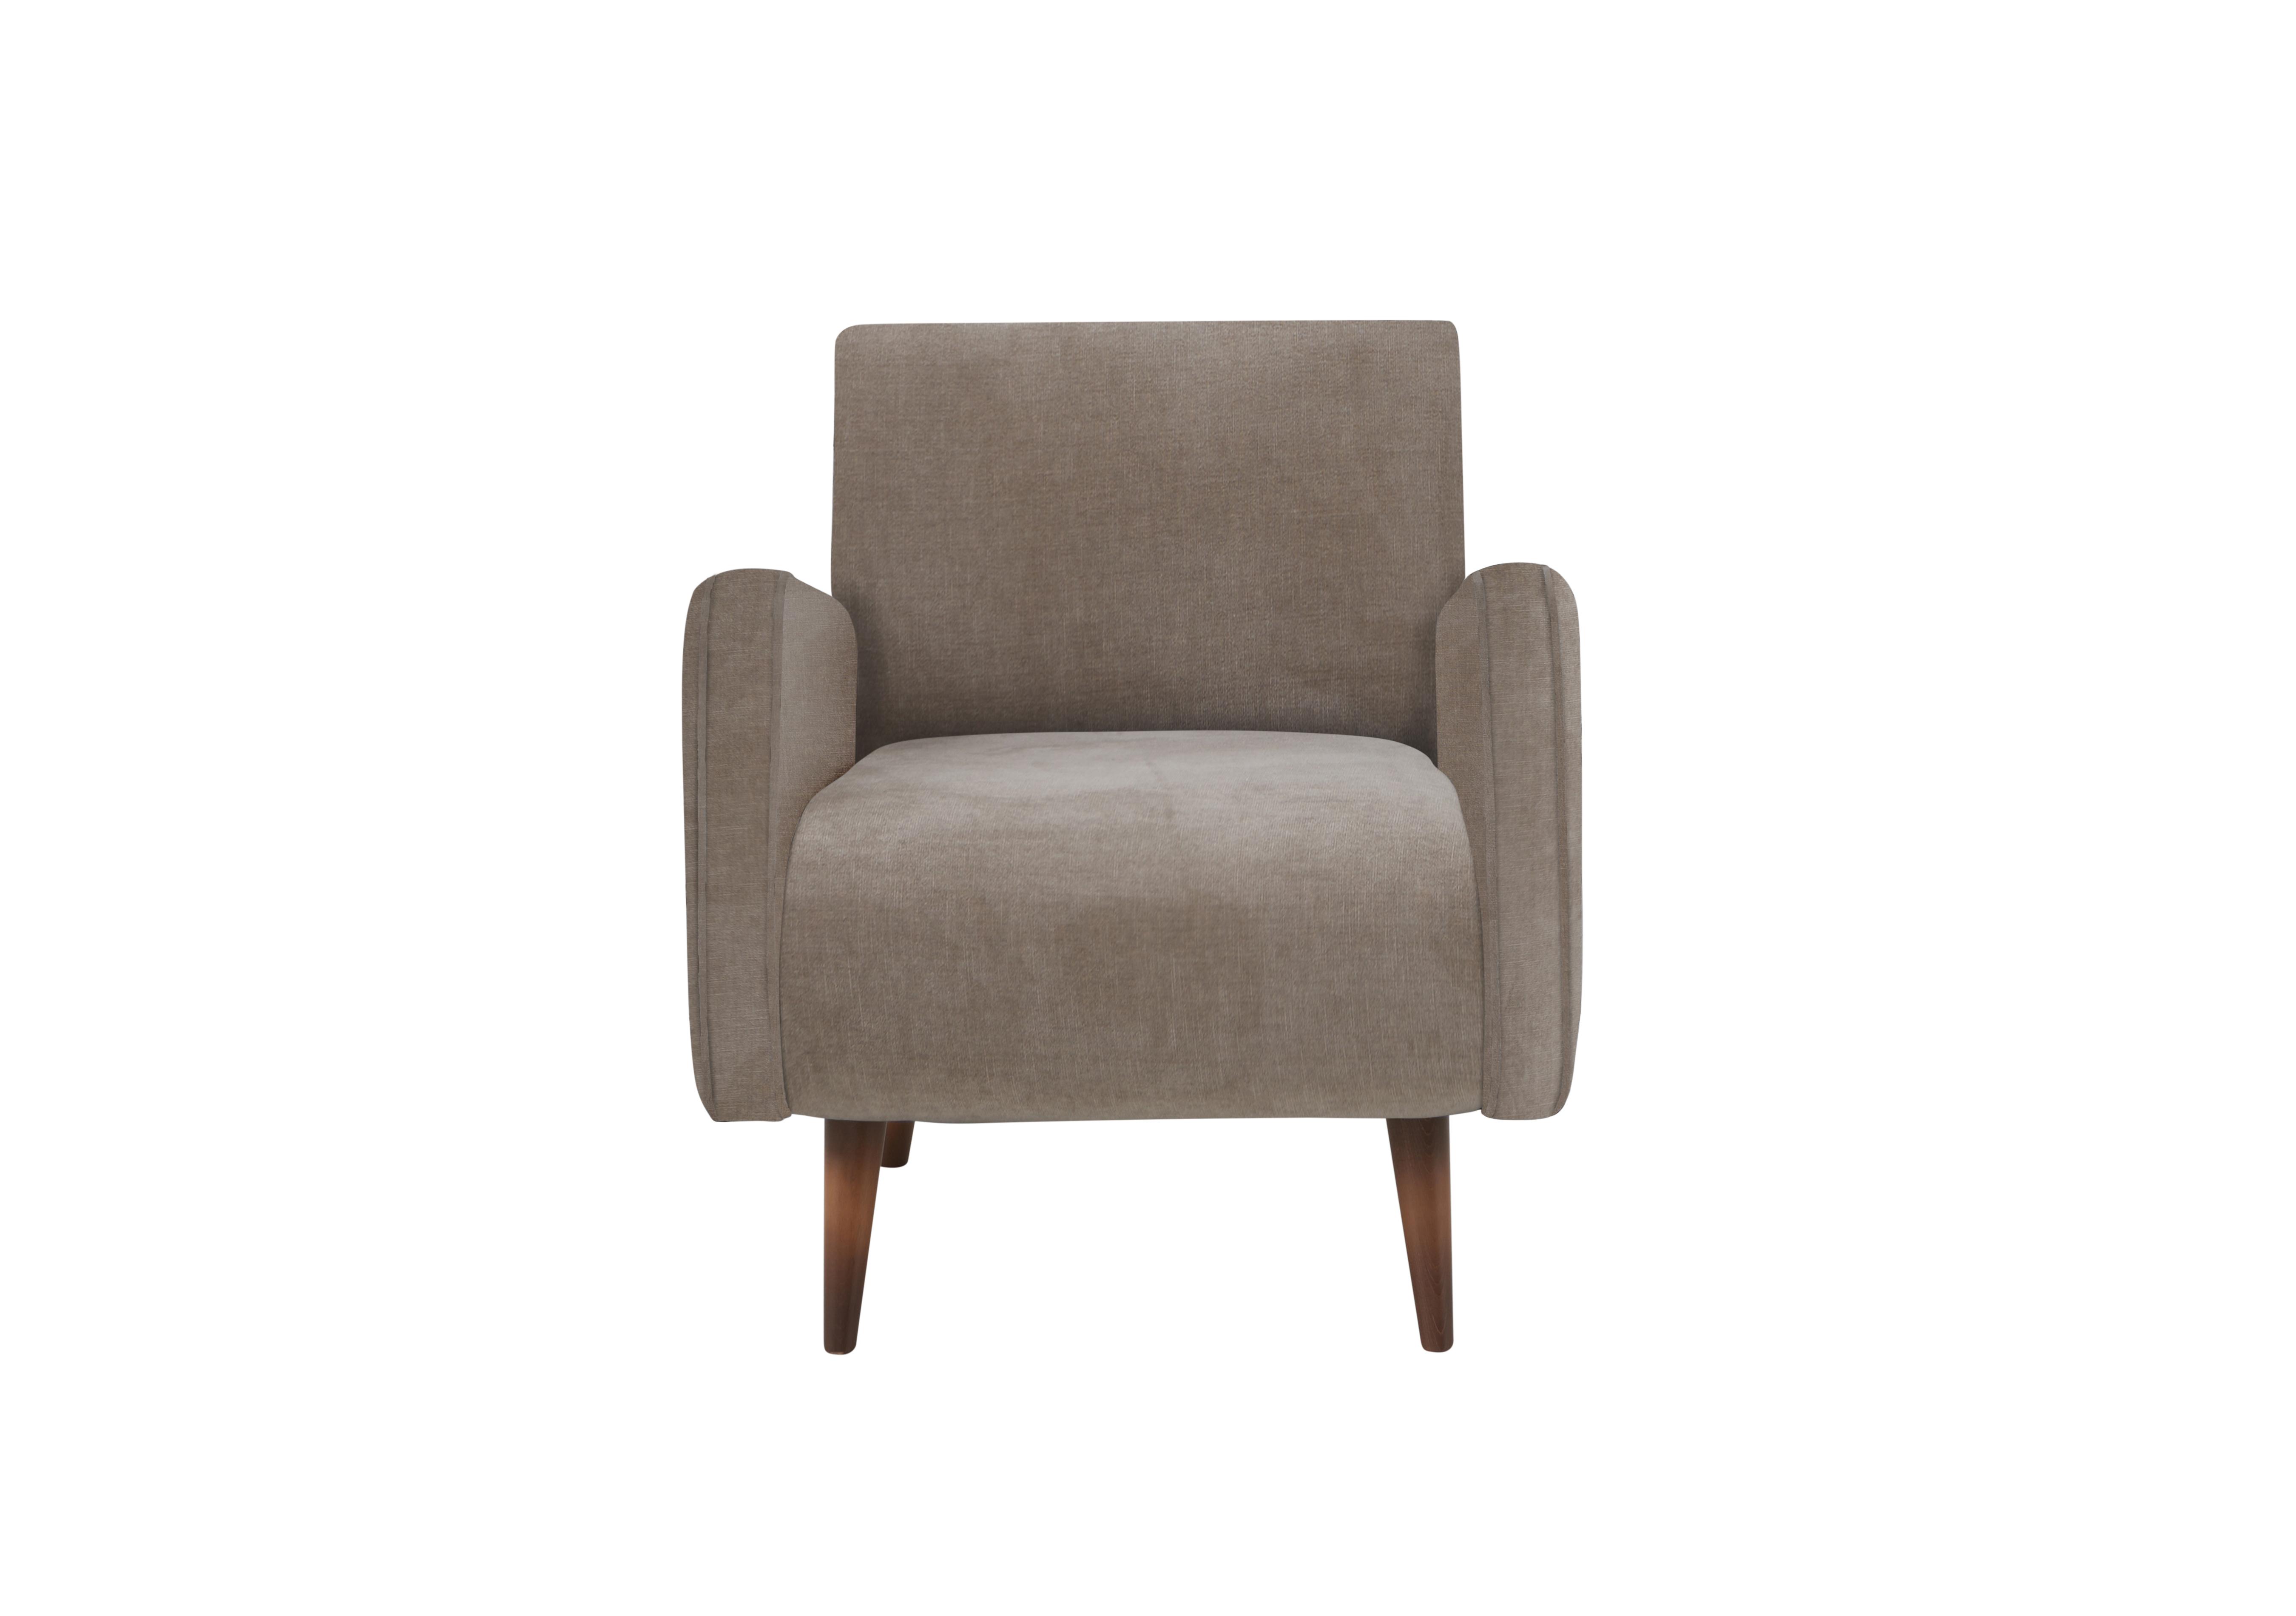 Sumptuous Fabric Accent Chair in Chamonix Wicker Dk on Furniture Village